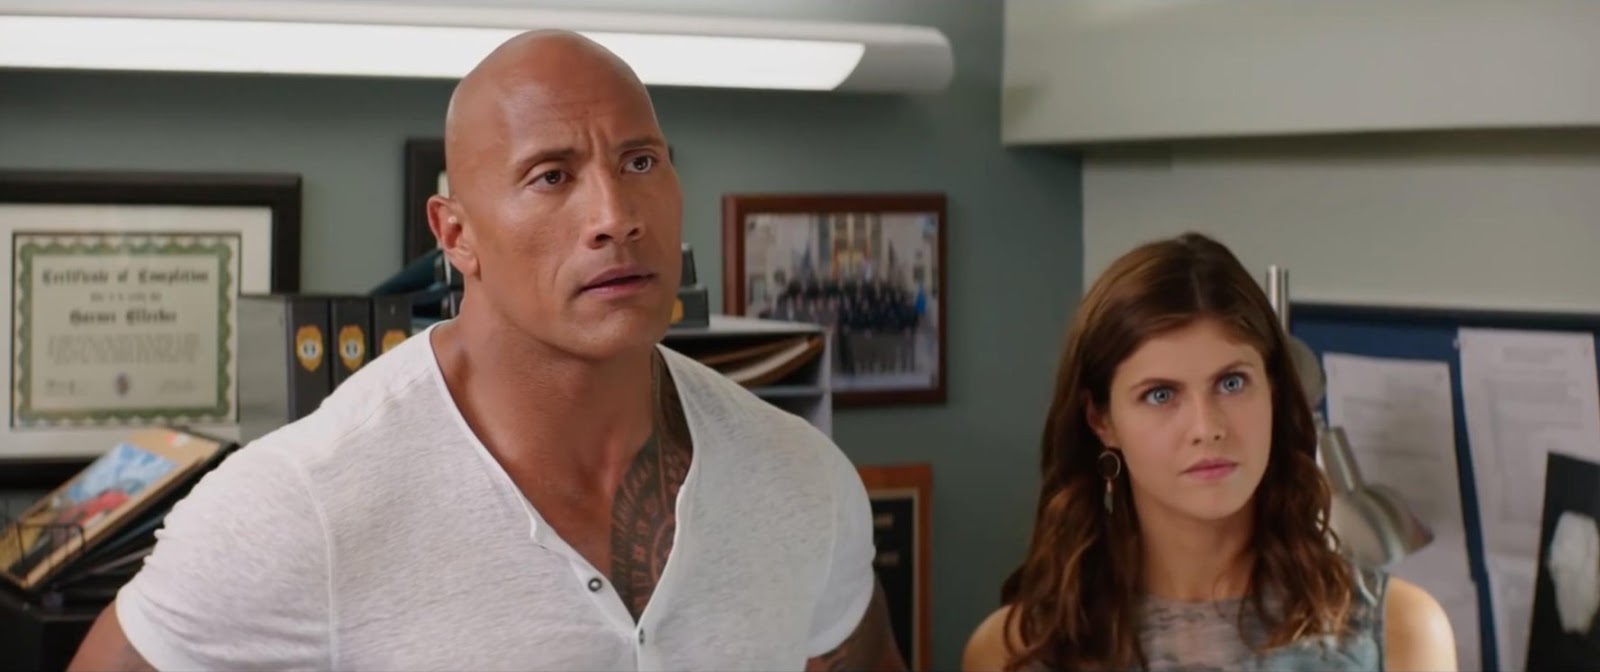 BAYWATCH (2017) - Trailers, Clips, Featurettes, Images and Posters ...